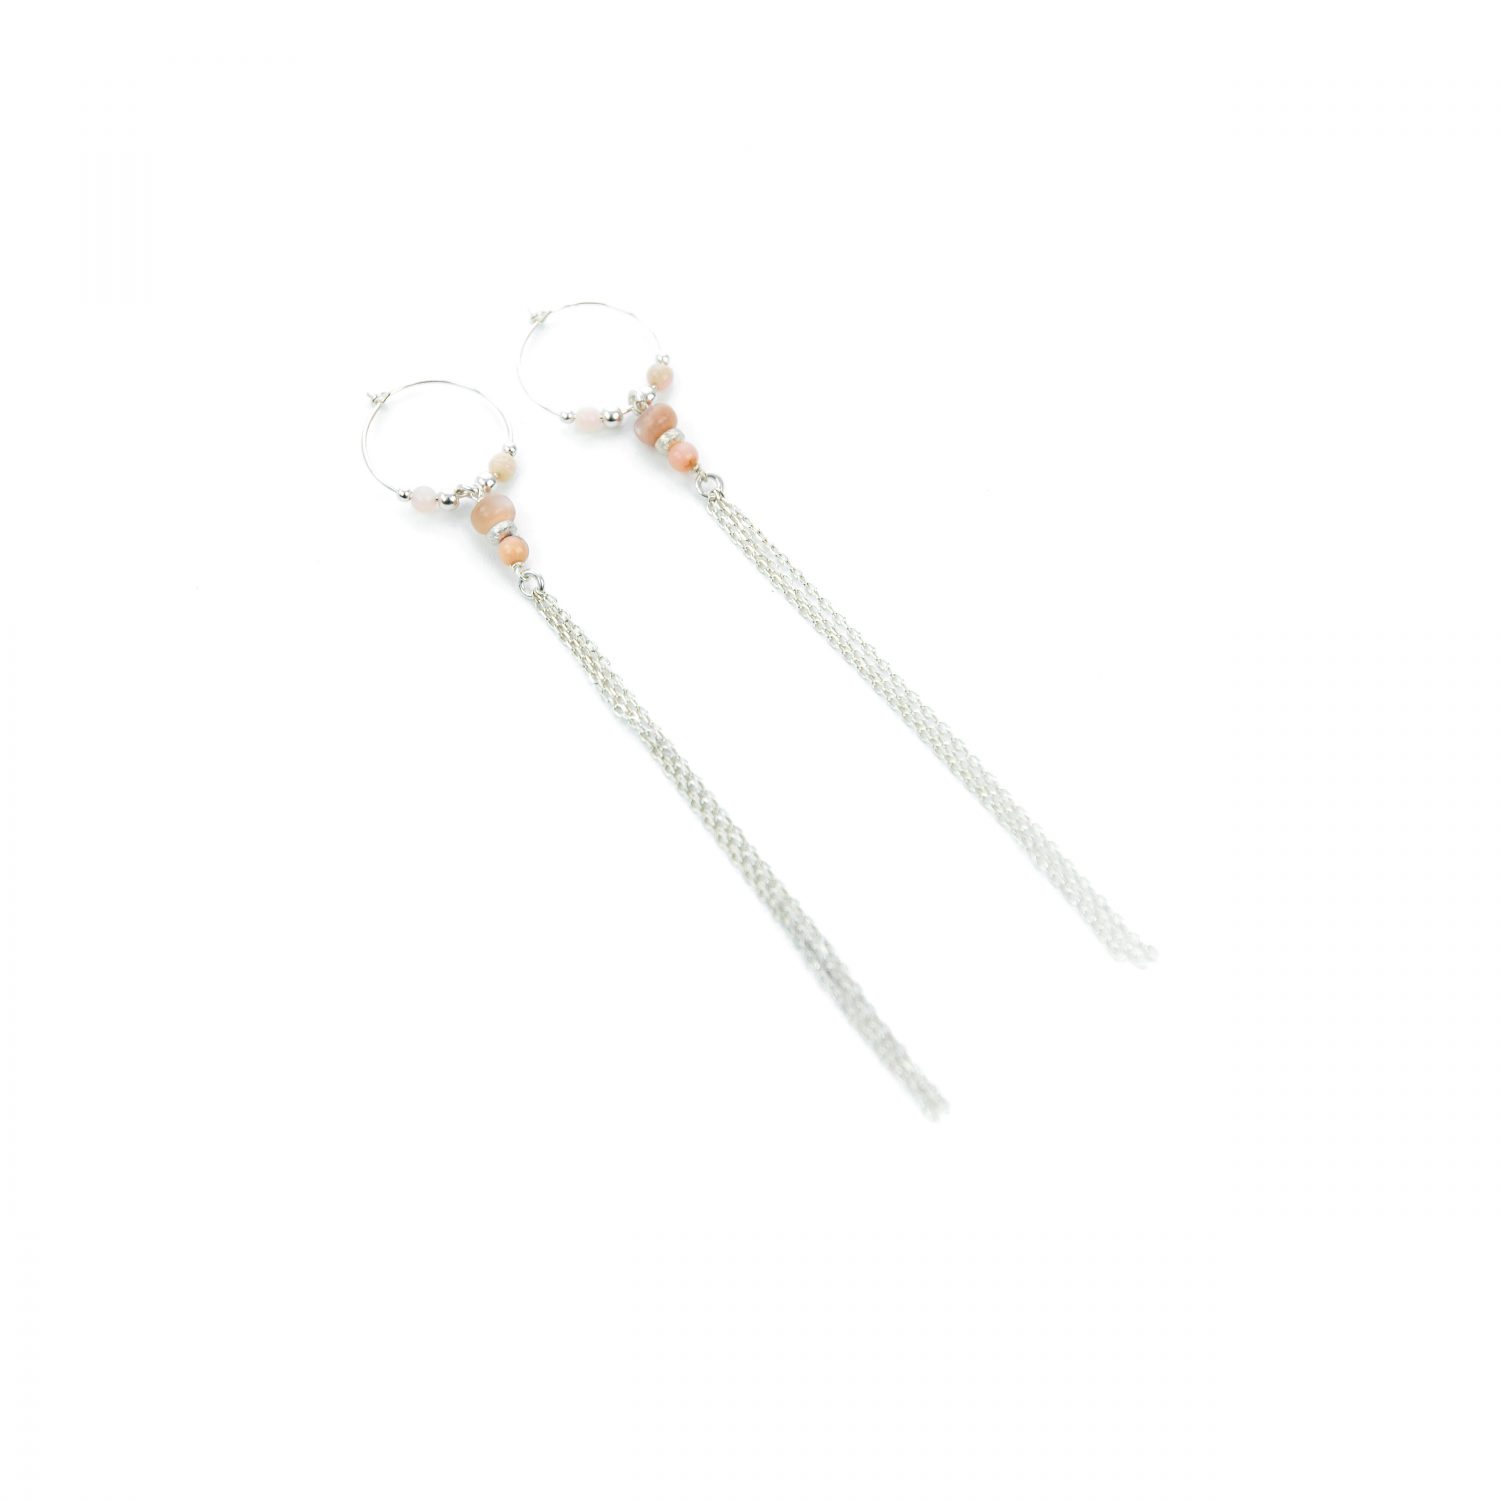 Boucles d'oreille XXL Betty roses argent 12 cm , bijoux fantaisie, bijoux haute fantaisie, bijoux de créateur, made in Antibes Juan les pins, créations artisanales francaises